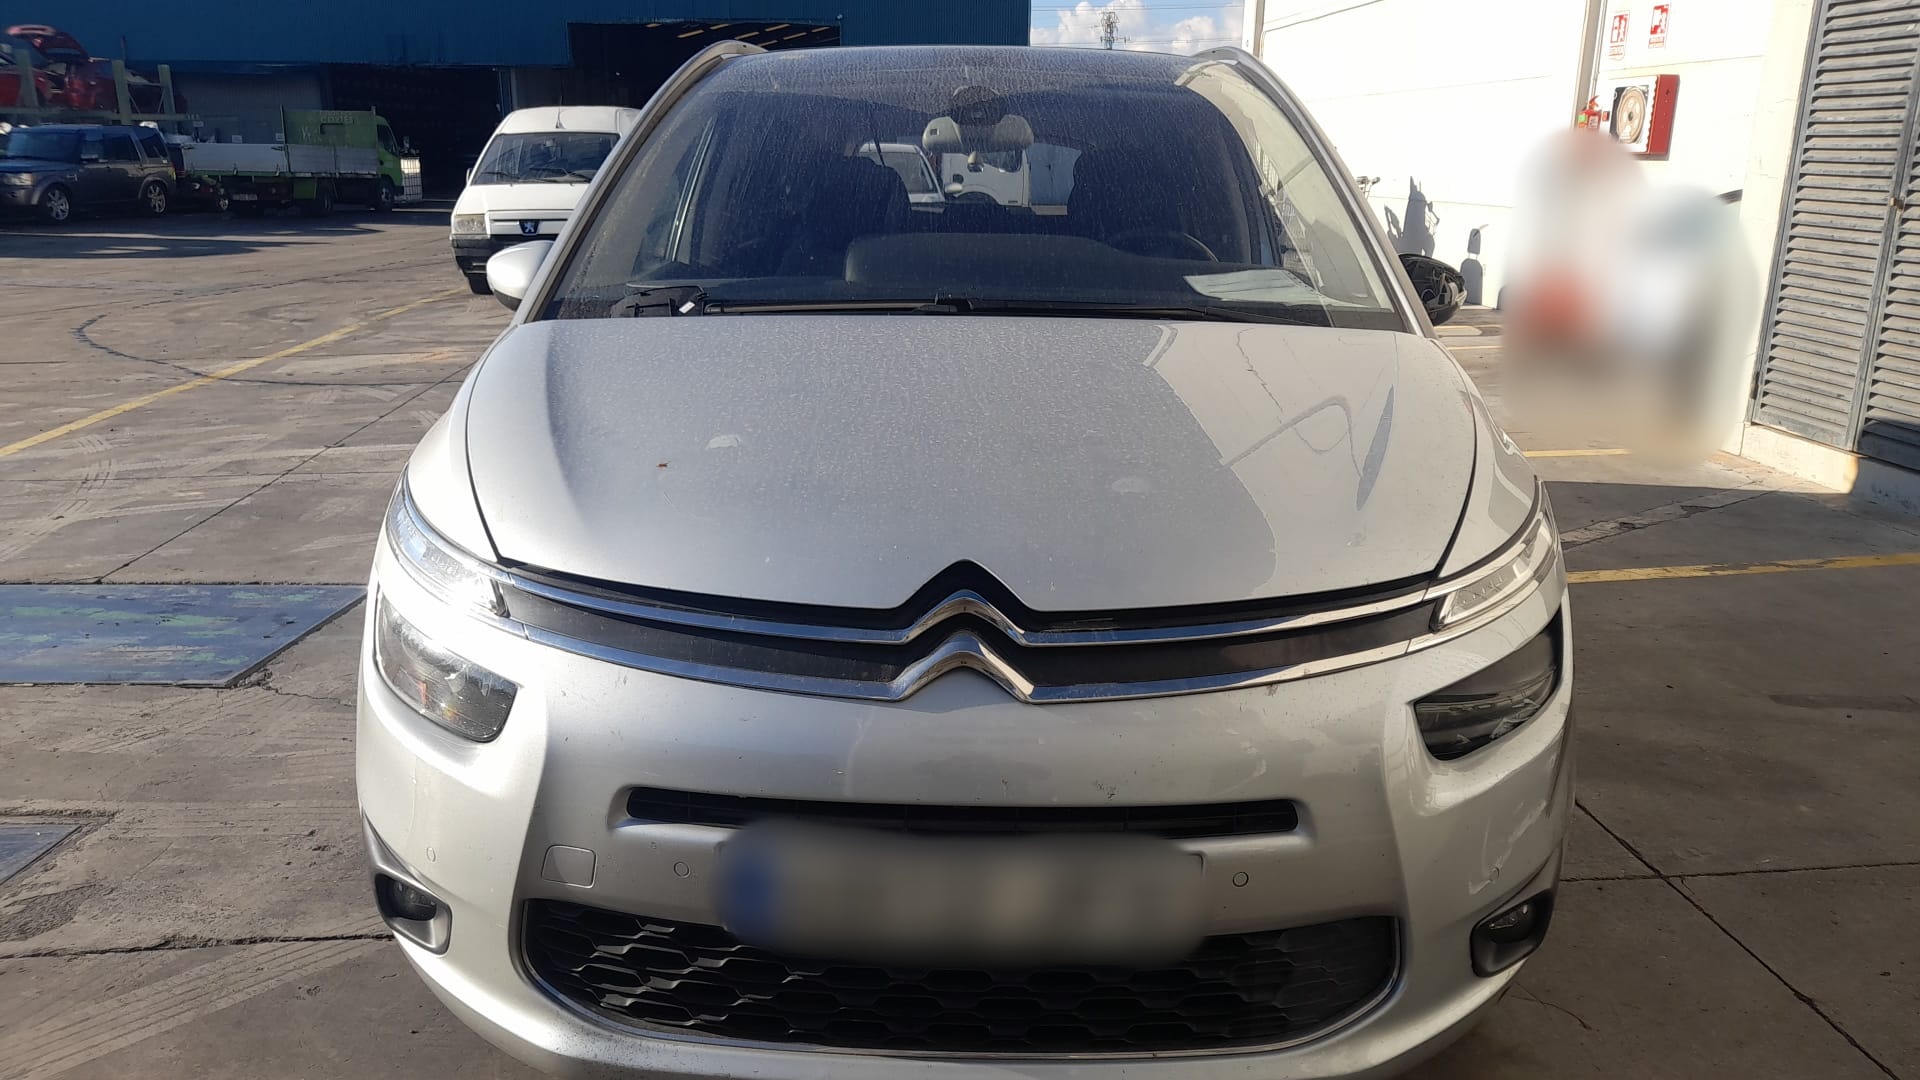 CITROËN C4 Picasso 2 generation (2013-2018) Other Body Parts 9674829780, 9674829780 24025516